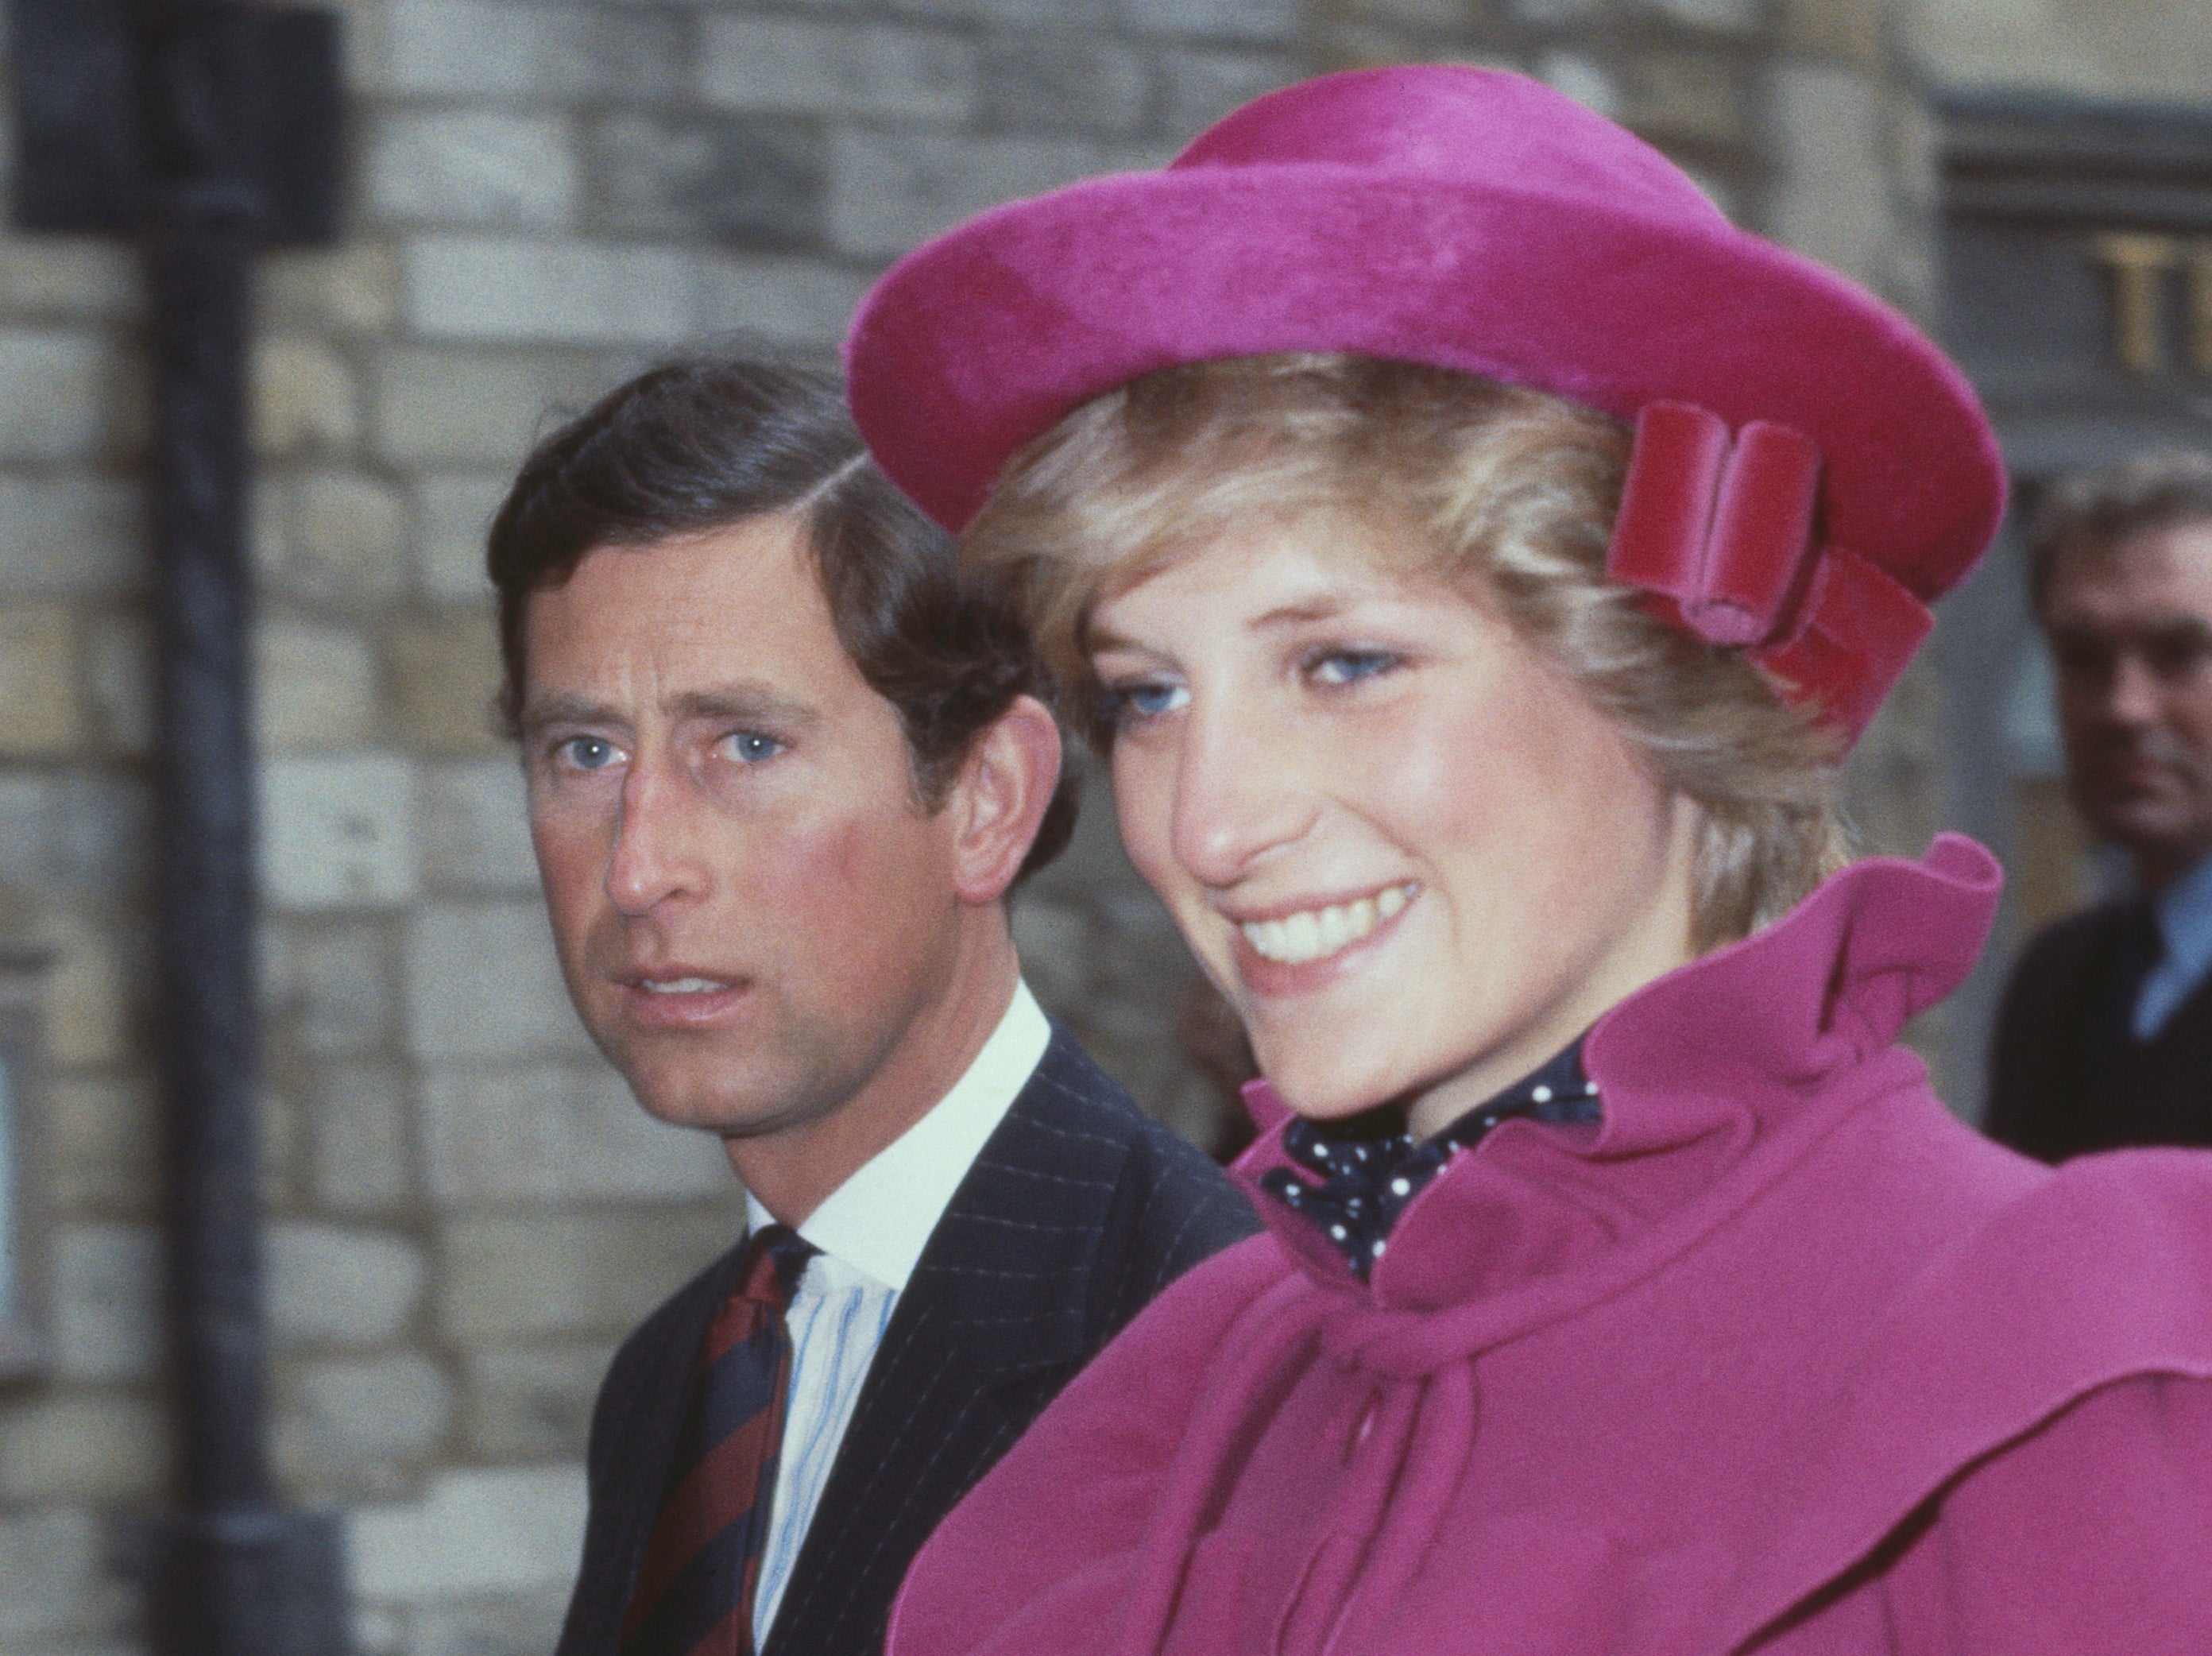 Diana spoke openly about her unhappy marriage to King Charles, and confirmed his affair with Camilla Parker-Bowles